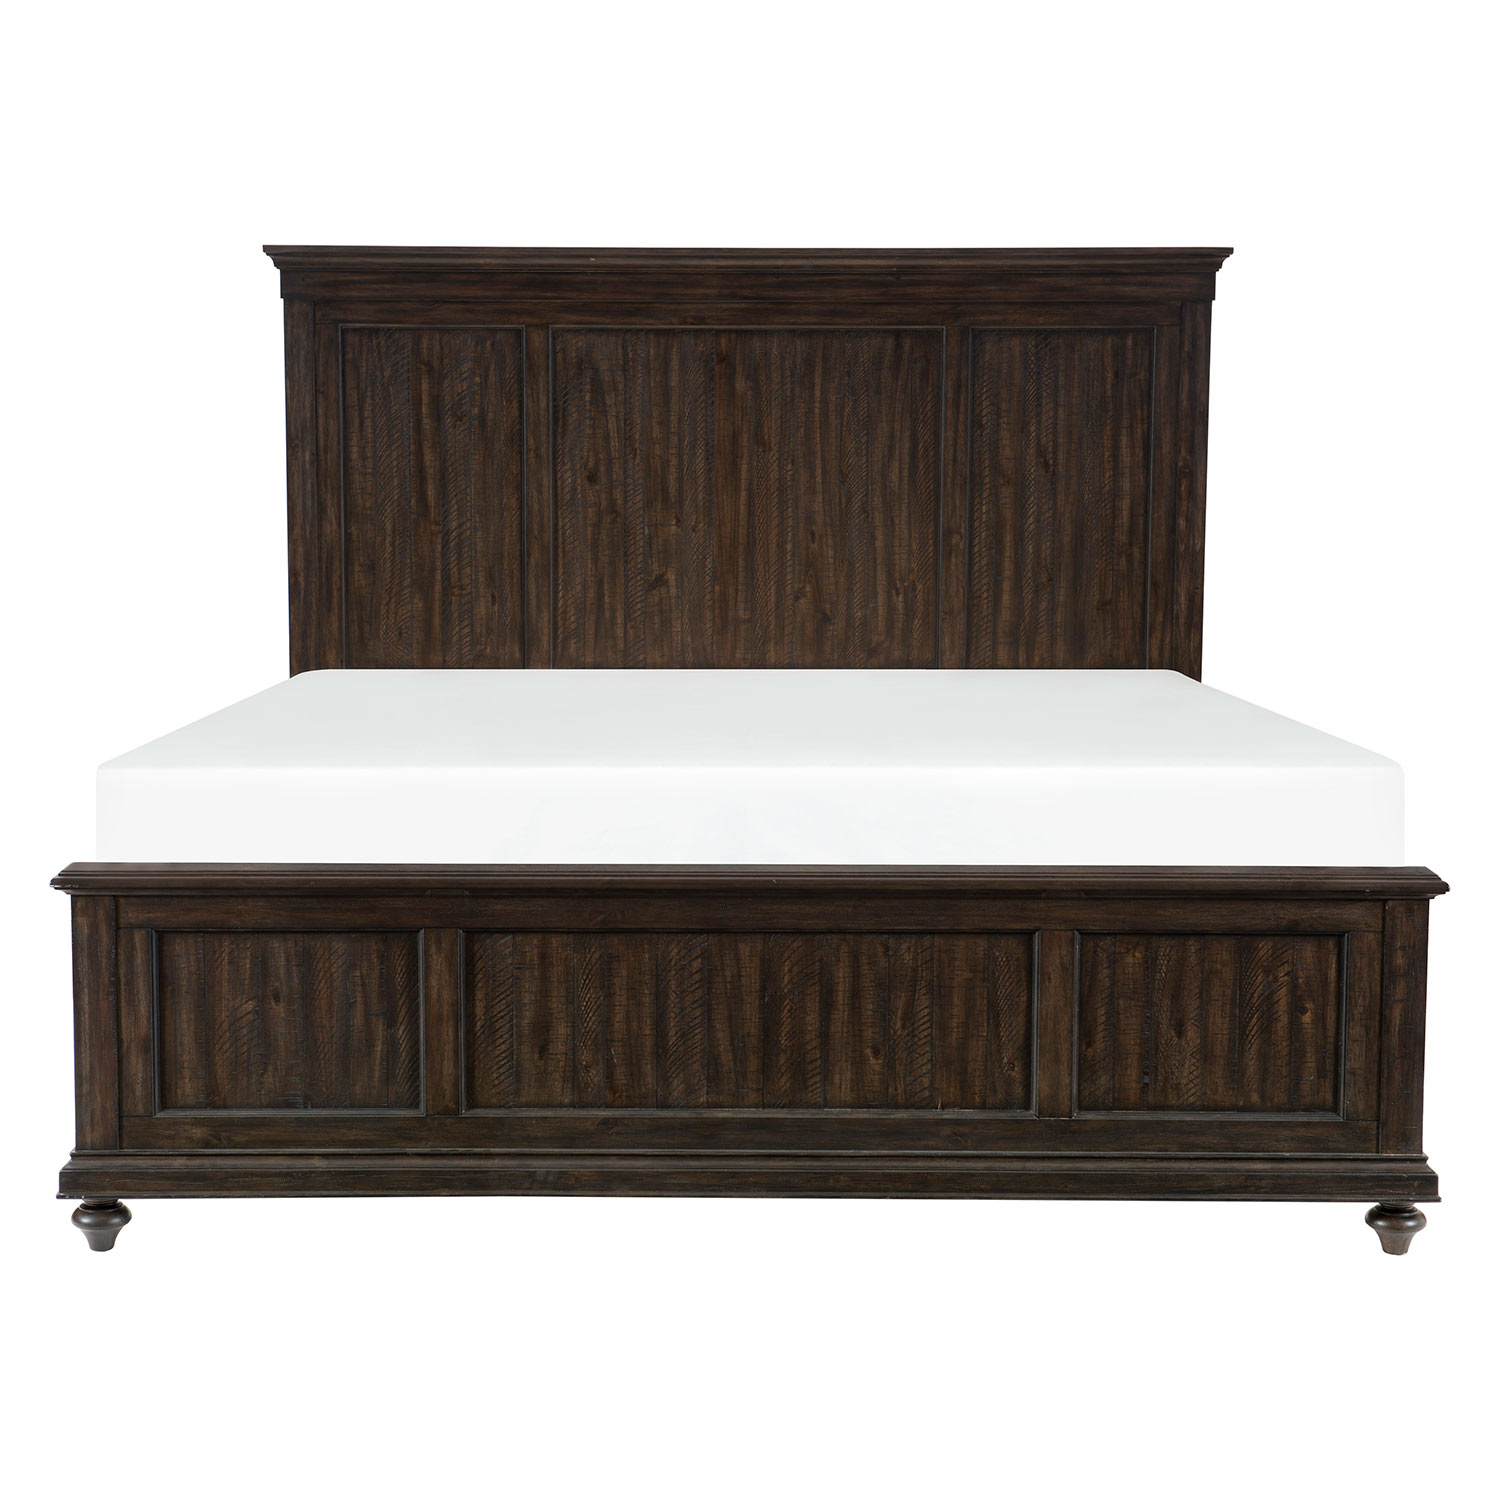 Homelegance Cardano Bed - Driftwood Charcoal over Acacia Solids and Veneers